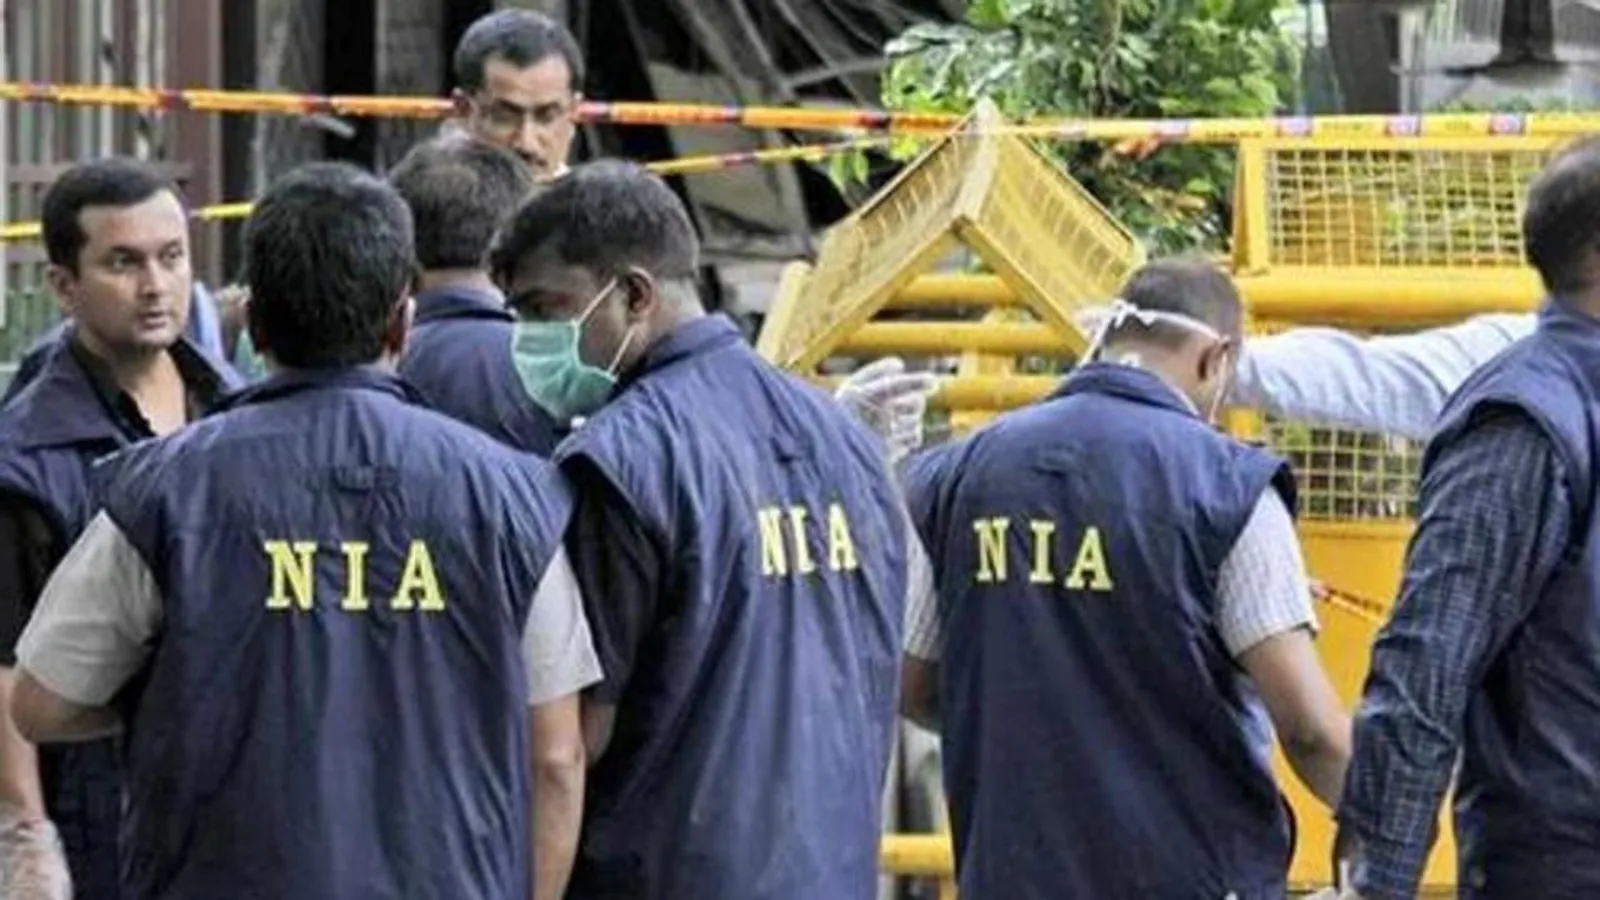 NIA charges 2 terrorists in connection with the Al-Qaeda Assam module